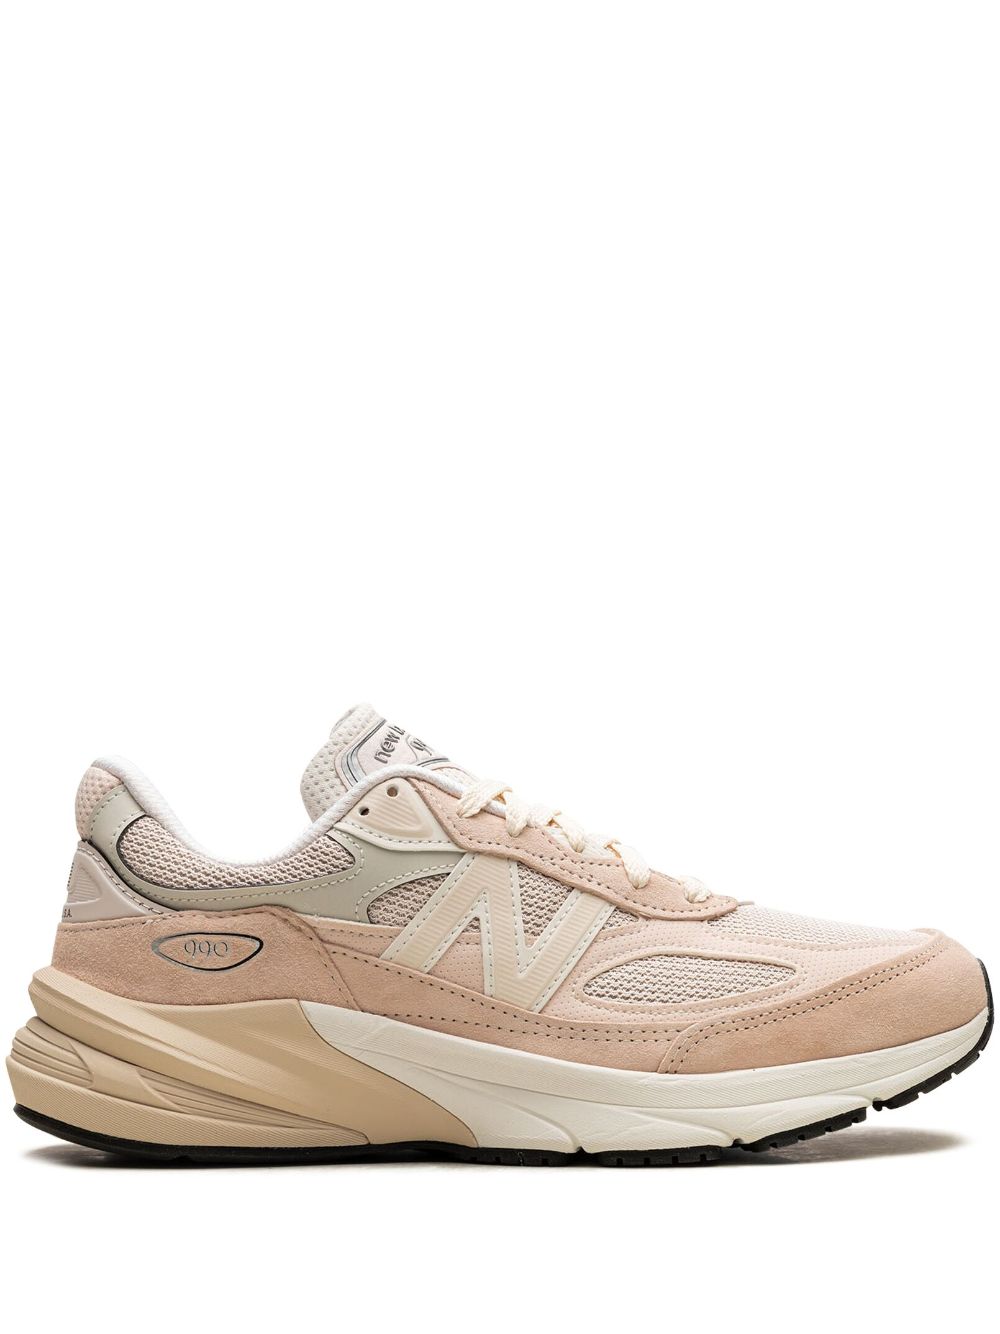 New Balance 990v6 "Made in USA - Vintage Rose" sneakers - Pink von New Balance